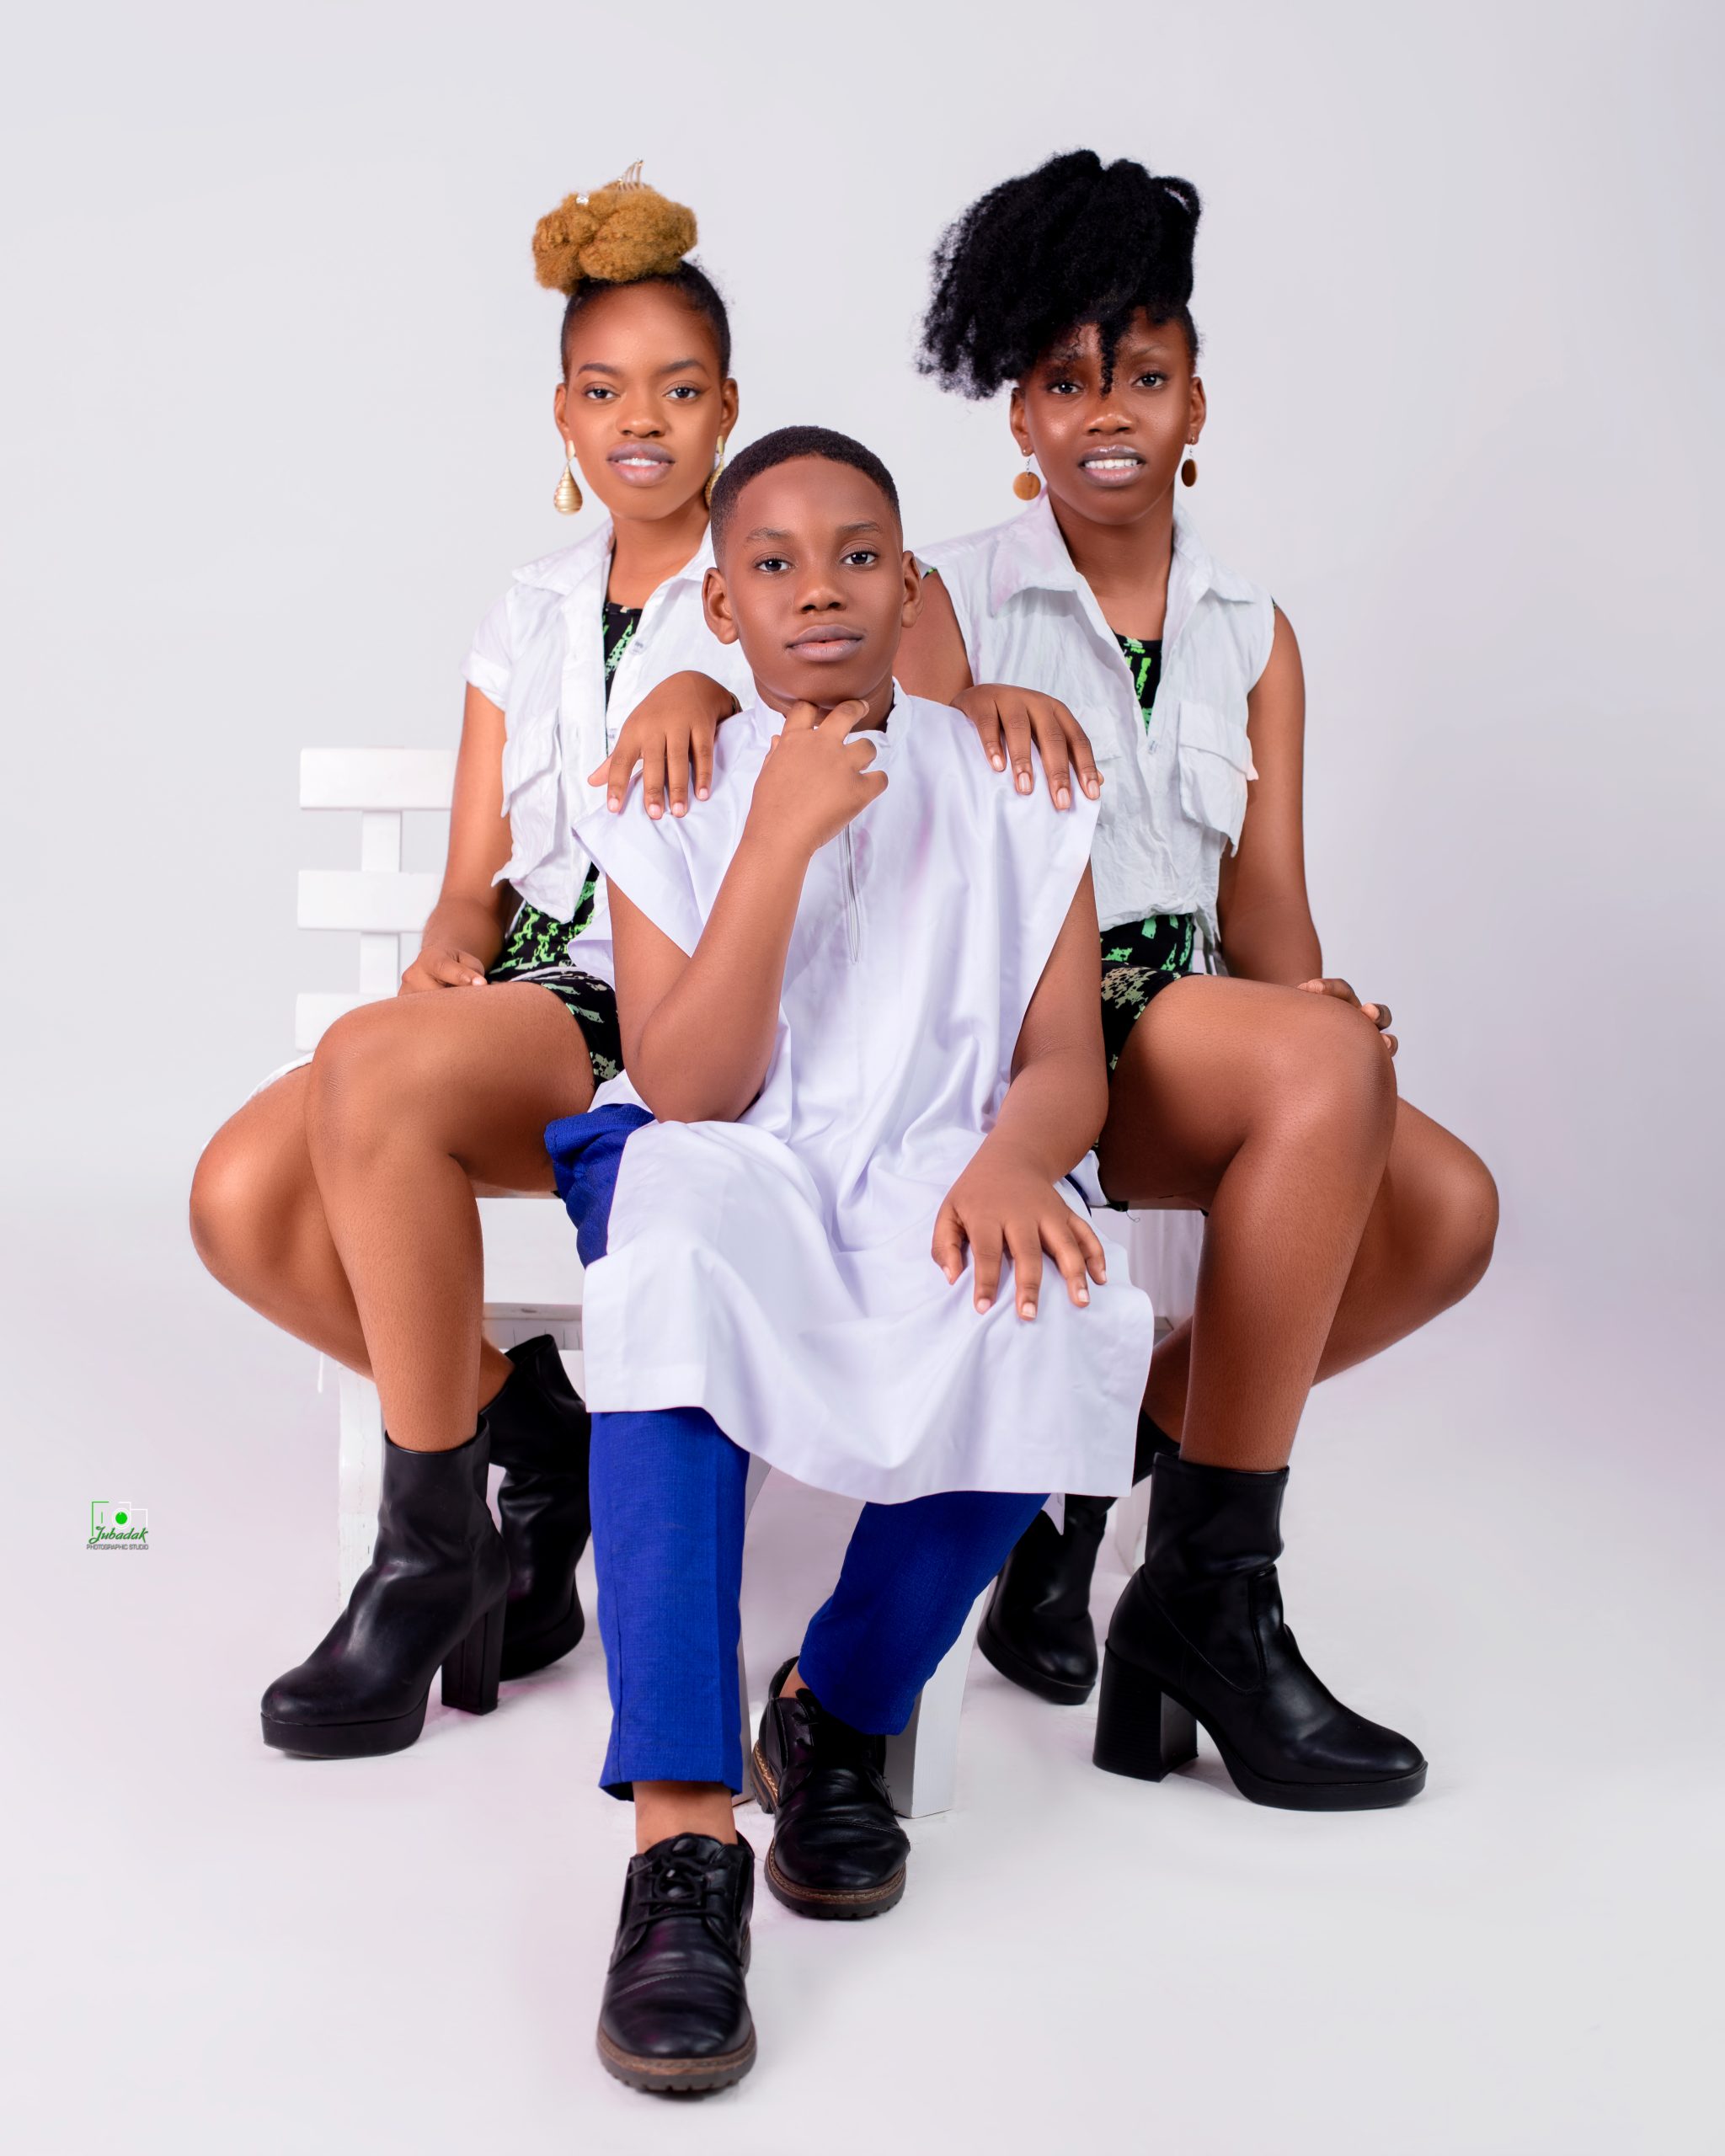 The Onyejekwe’s: Meet The Child Models Who Are Taking The Industry By Storm